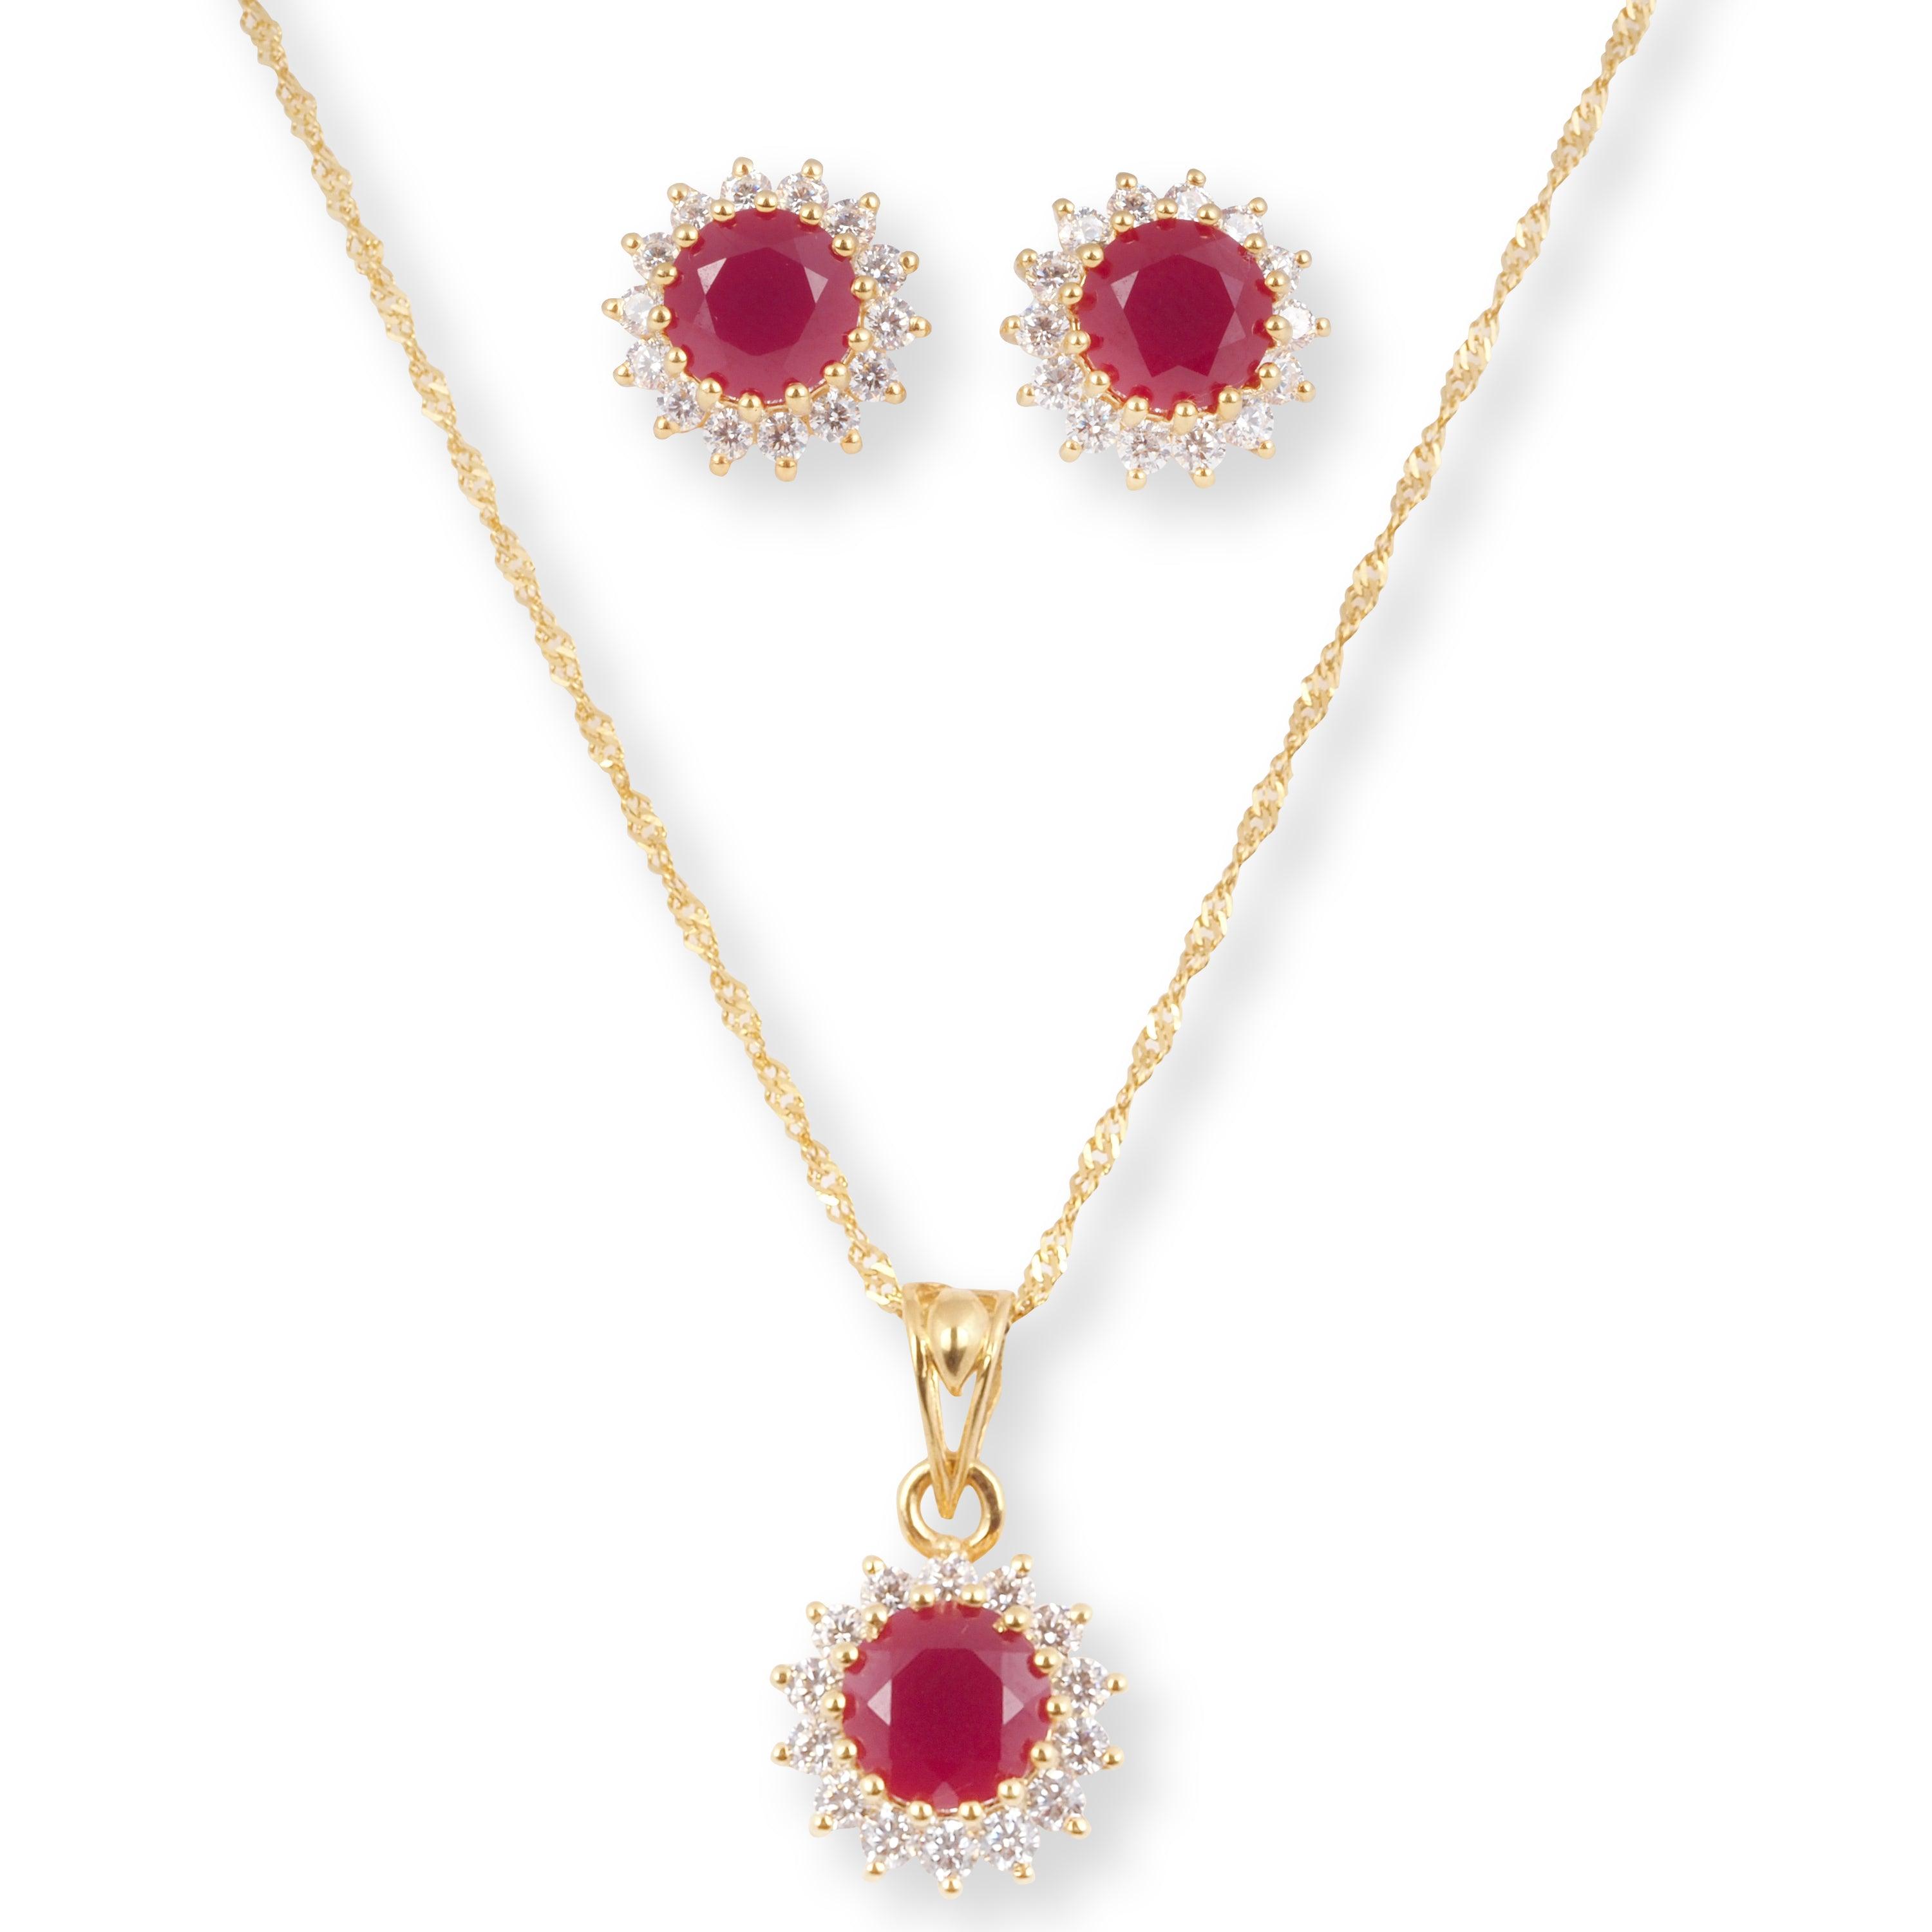 22ct Yellow Gold Pendant Set with Red Stone an Cubic Zirconia Stones P-8002 E-8002A - Minar Jewellers